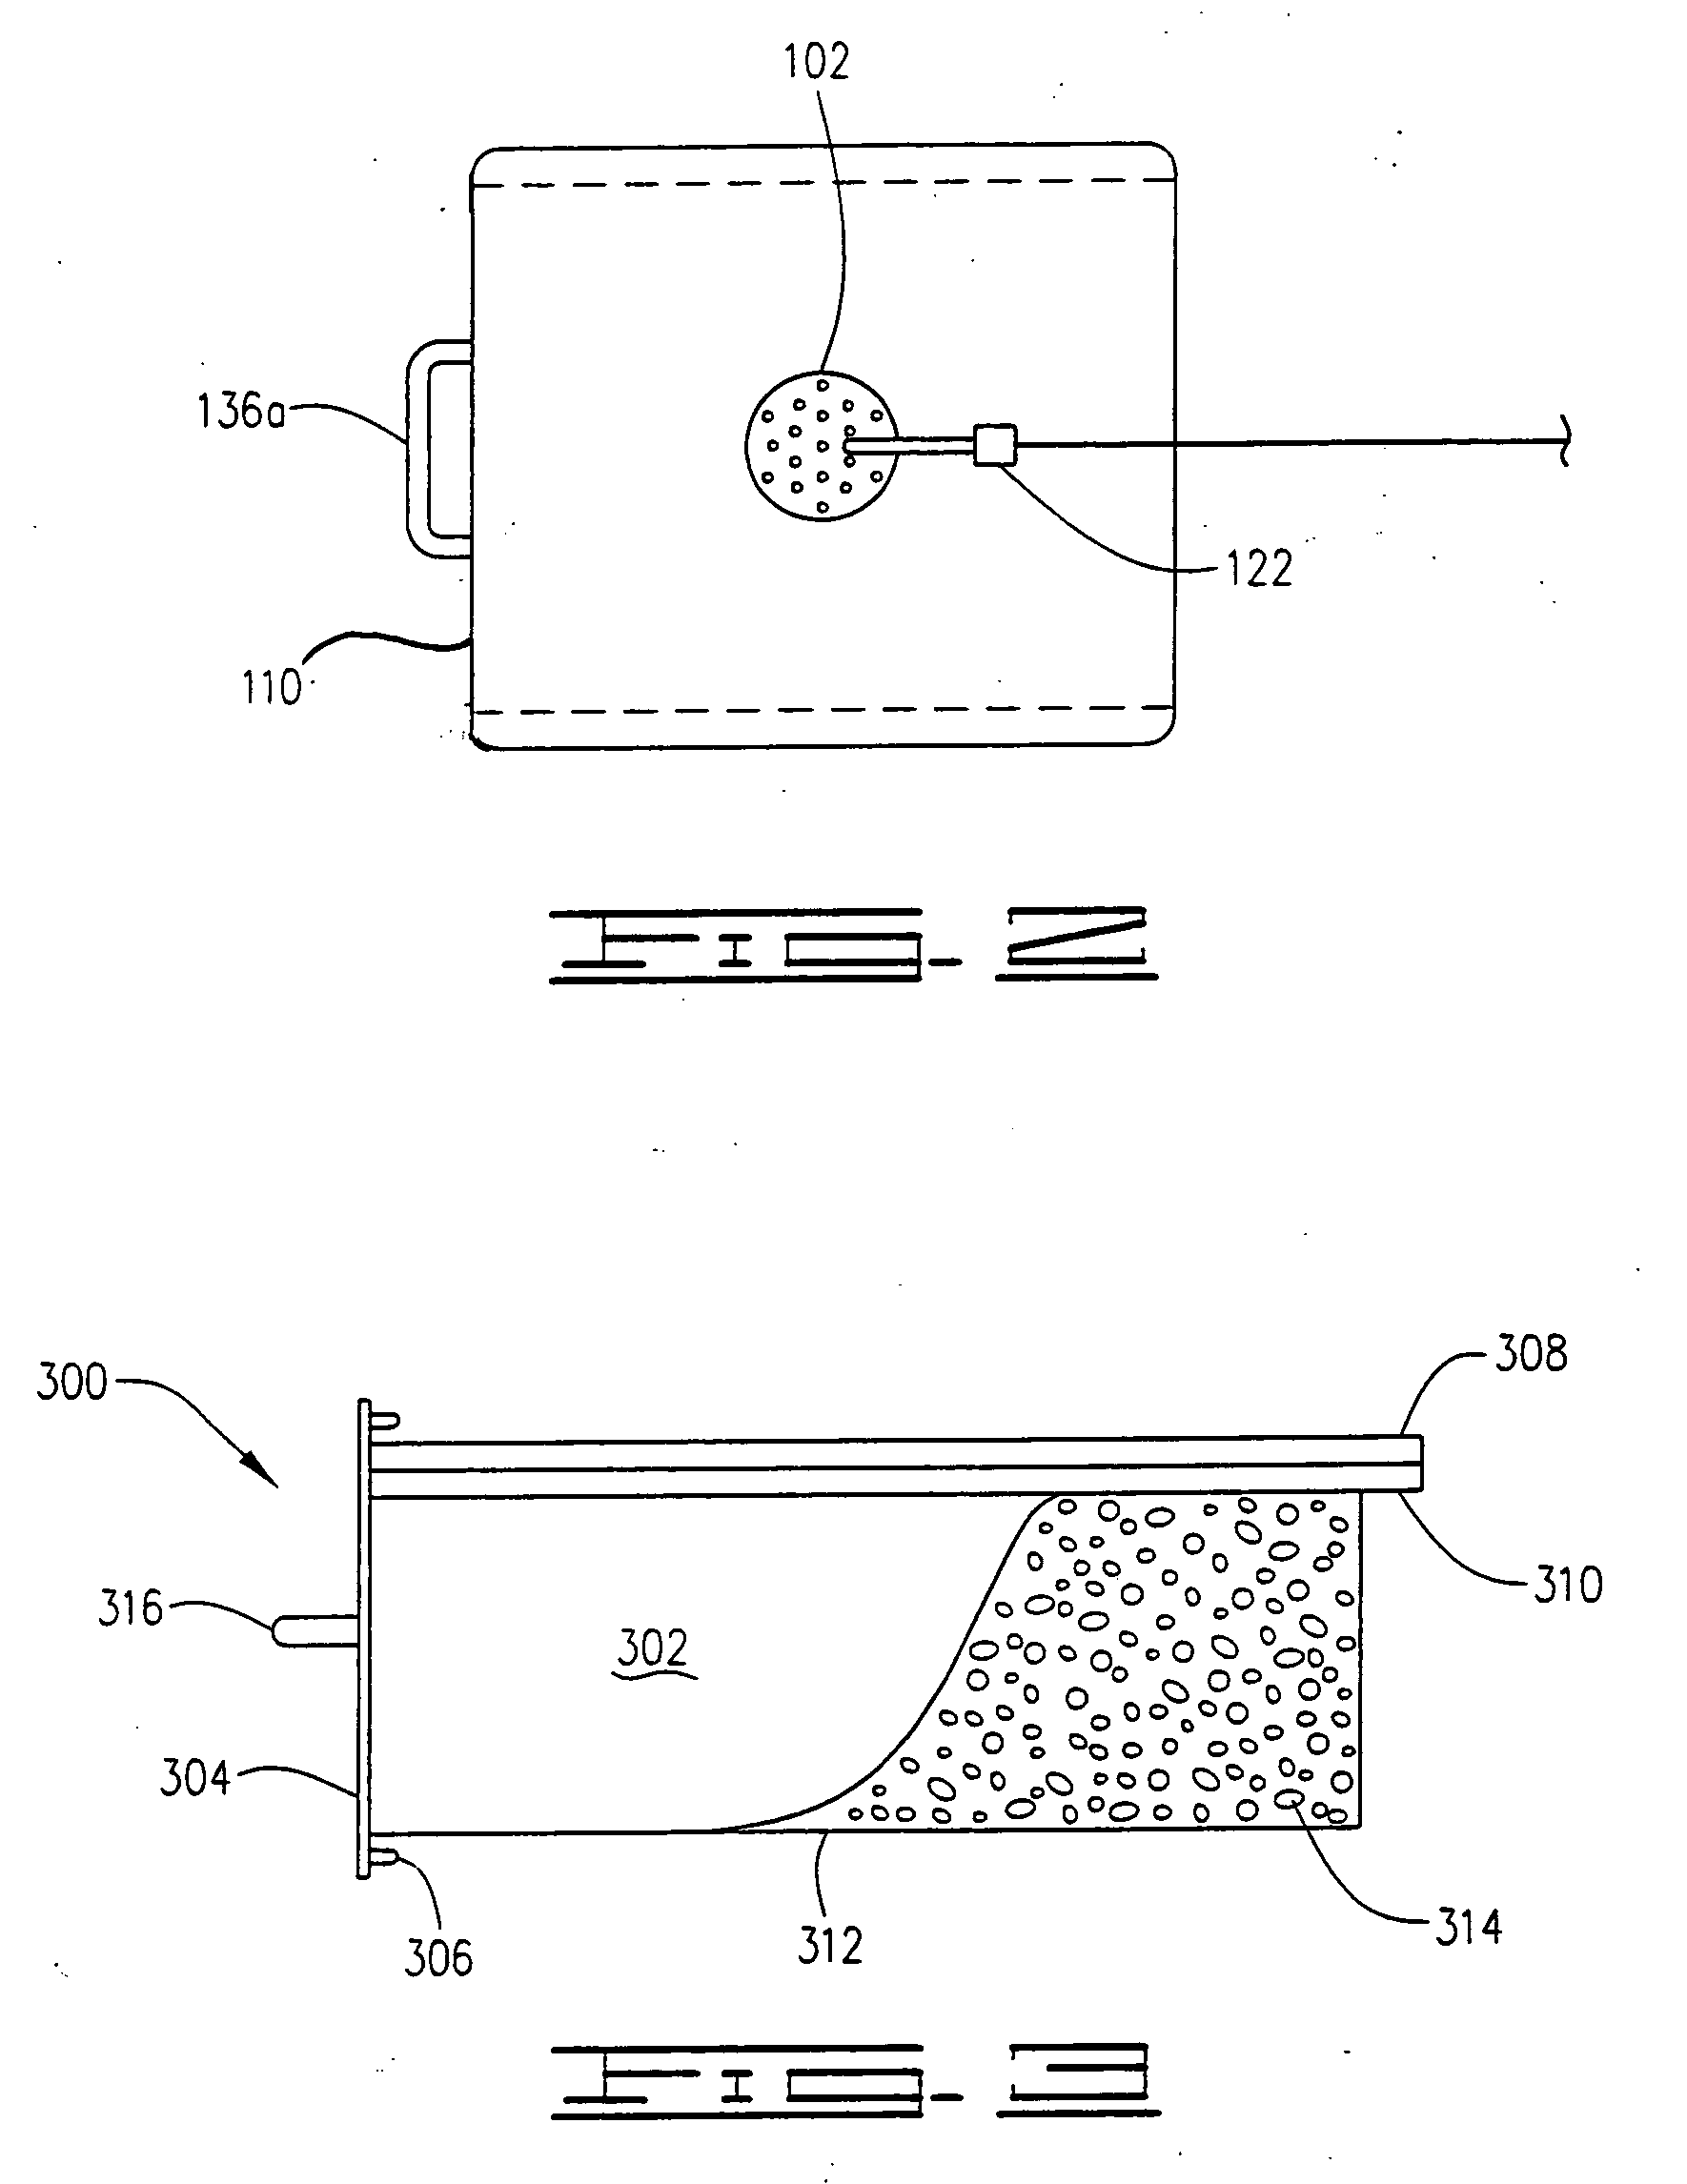 Apparatus for target compound treatment